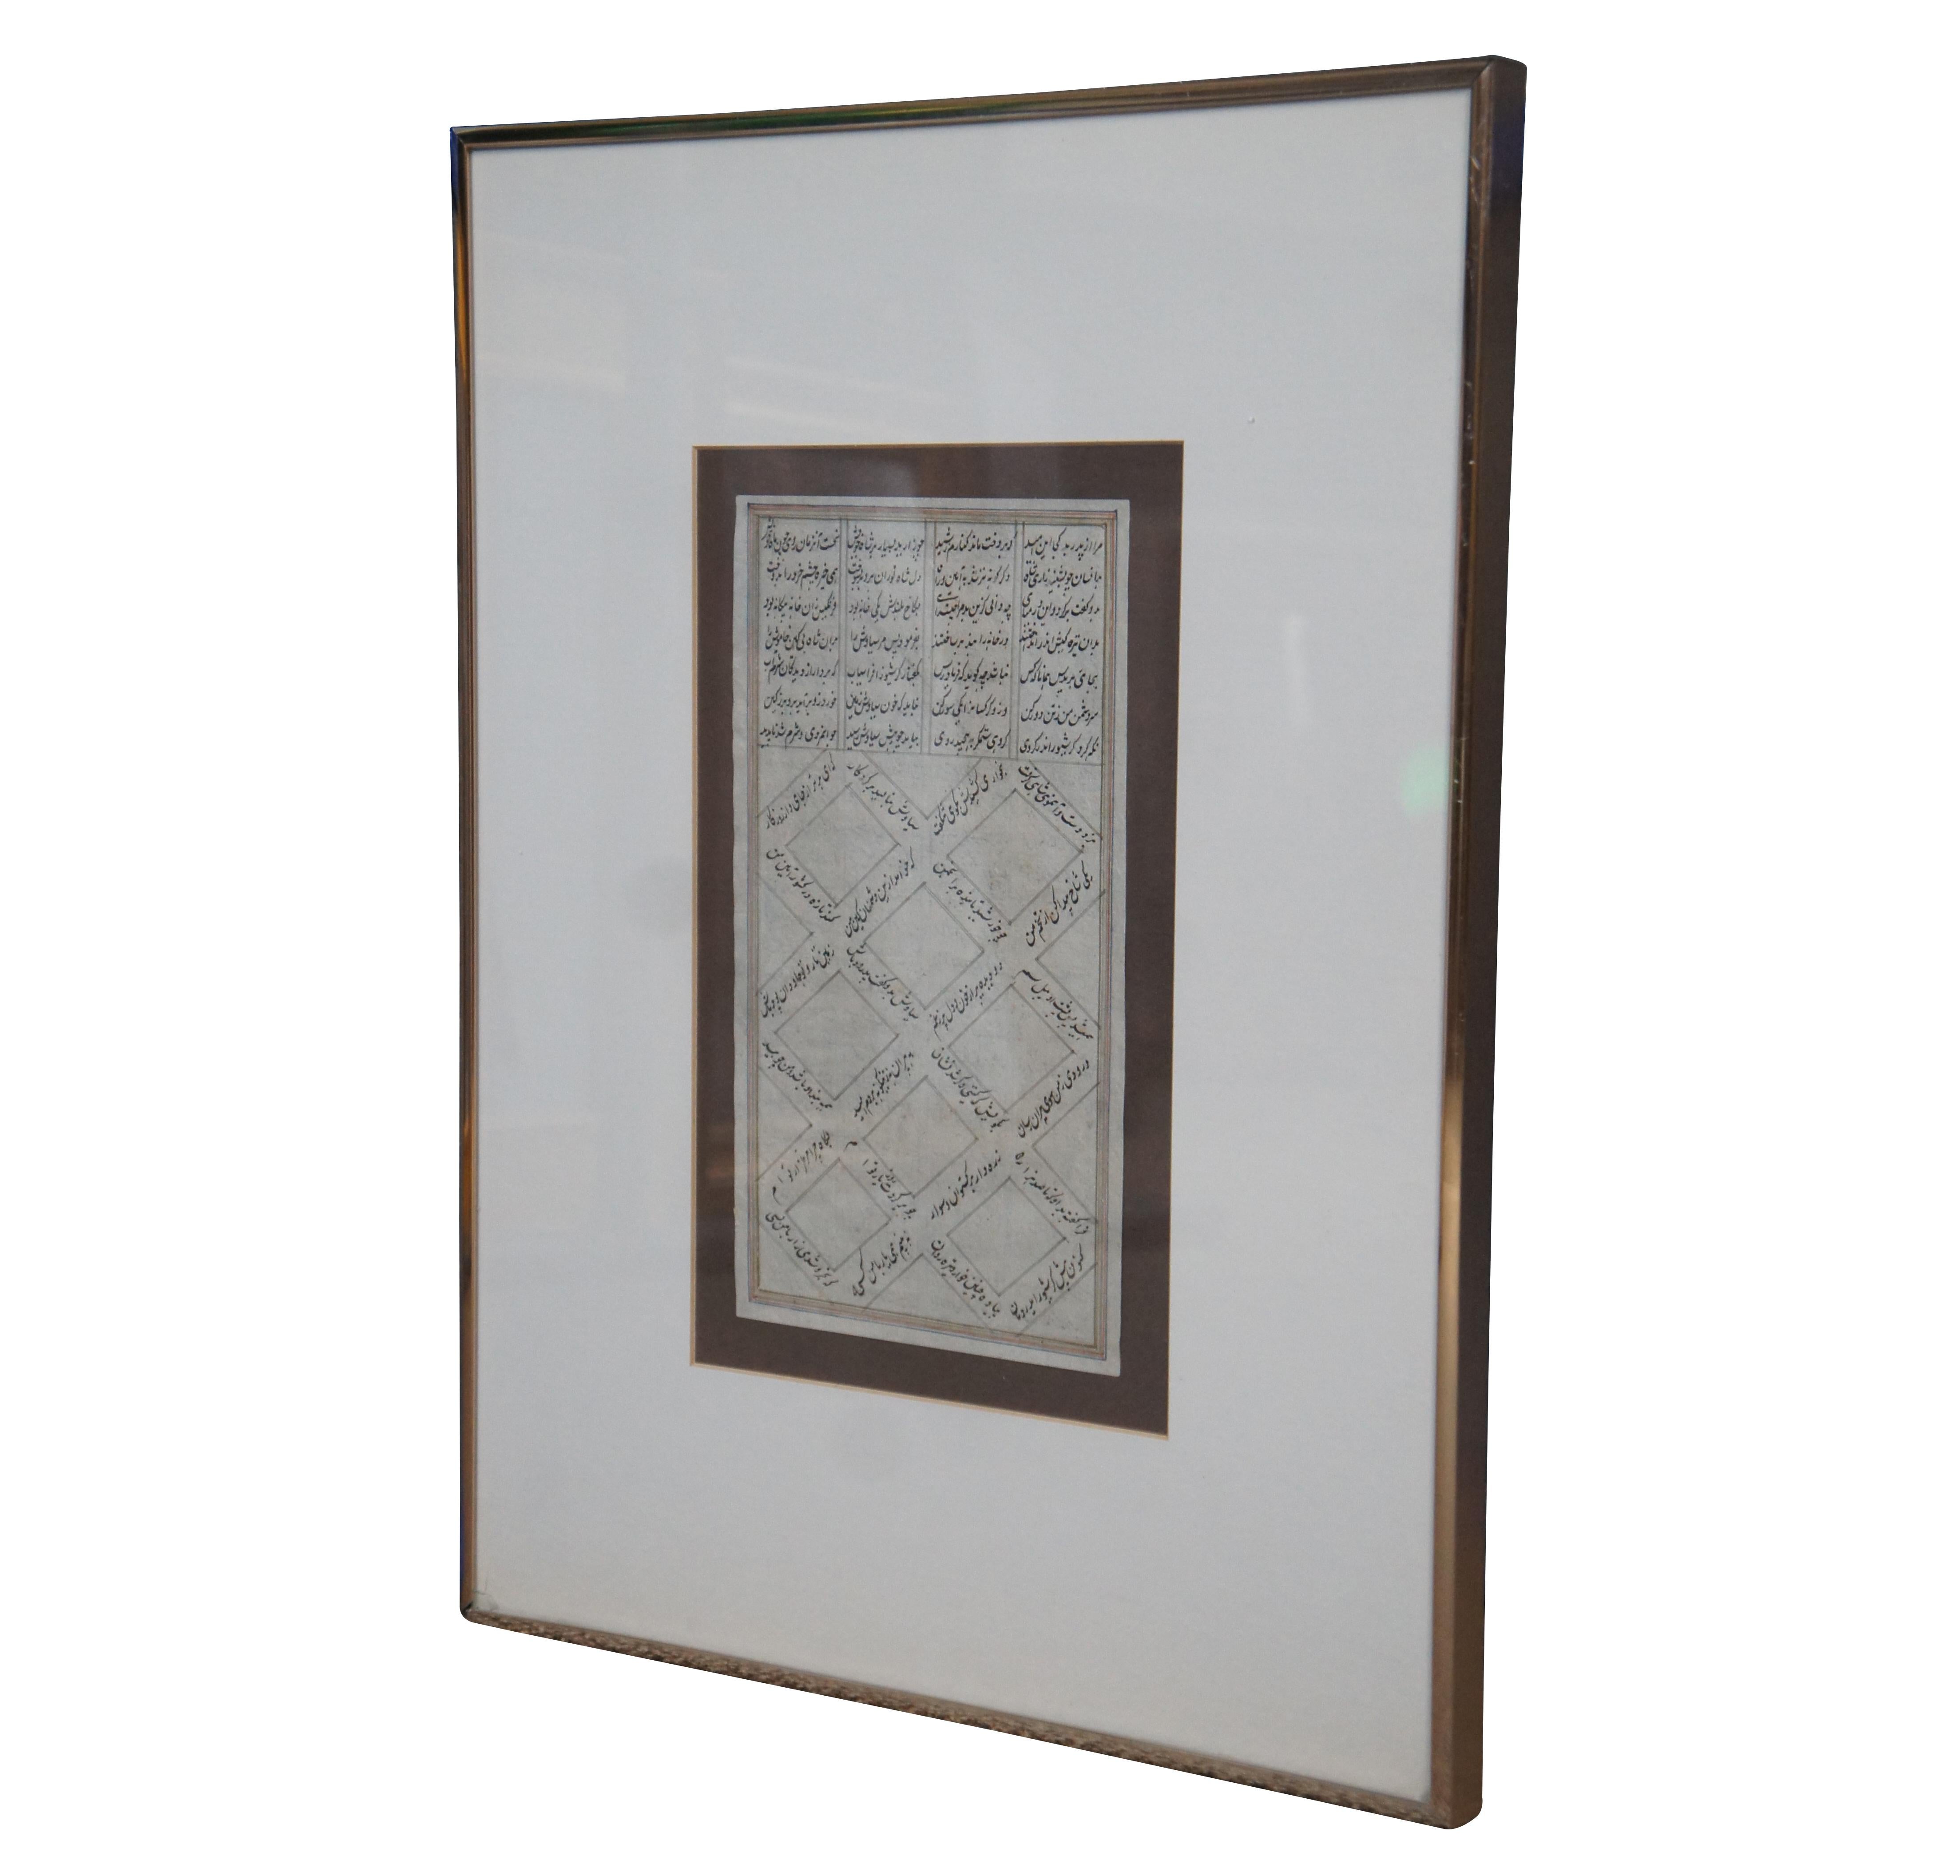 Antique framed prayer / poem / manuscript book page from the Shahnameh epic featuring Persian / Arabic / Iranian / Islamic calligraphy arranged in geometric lattice design.

The Shahnameh or Shahnama is a huge Persian epic located in about sixty